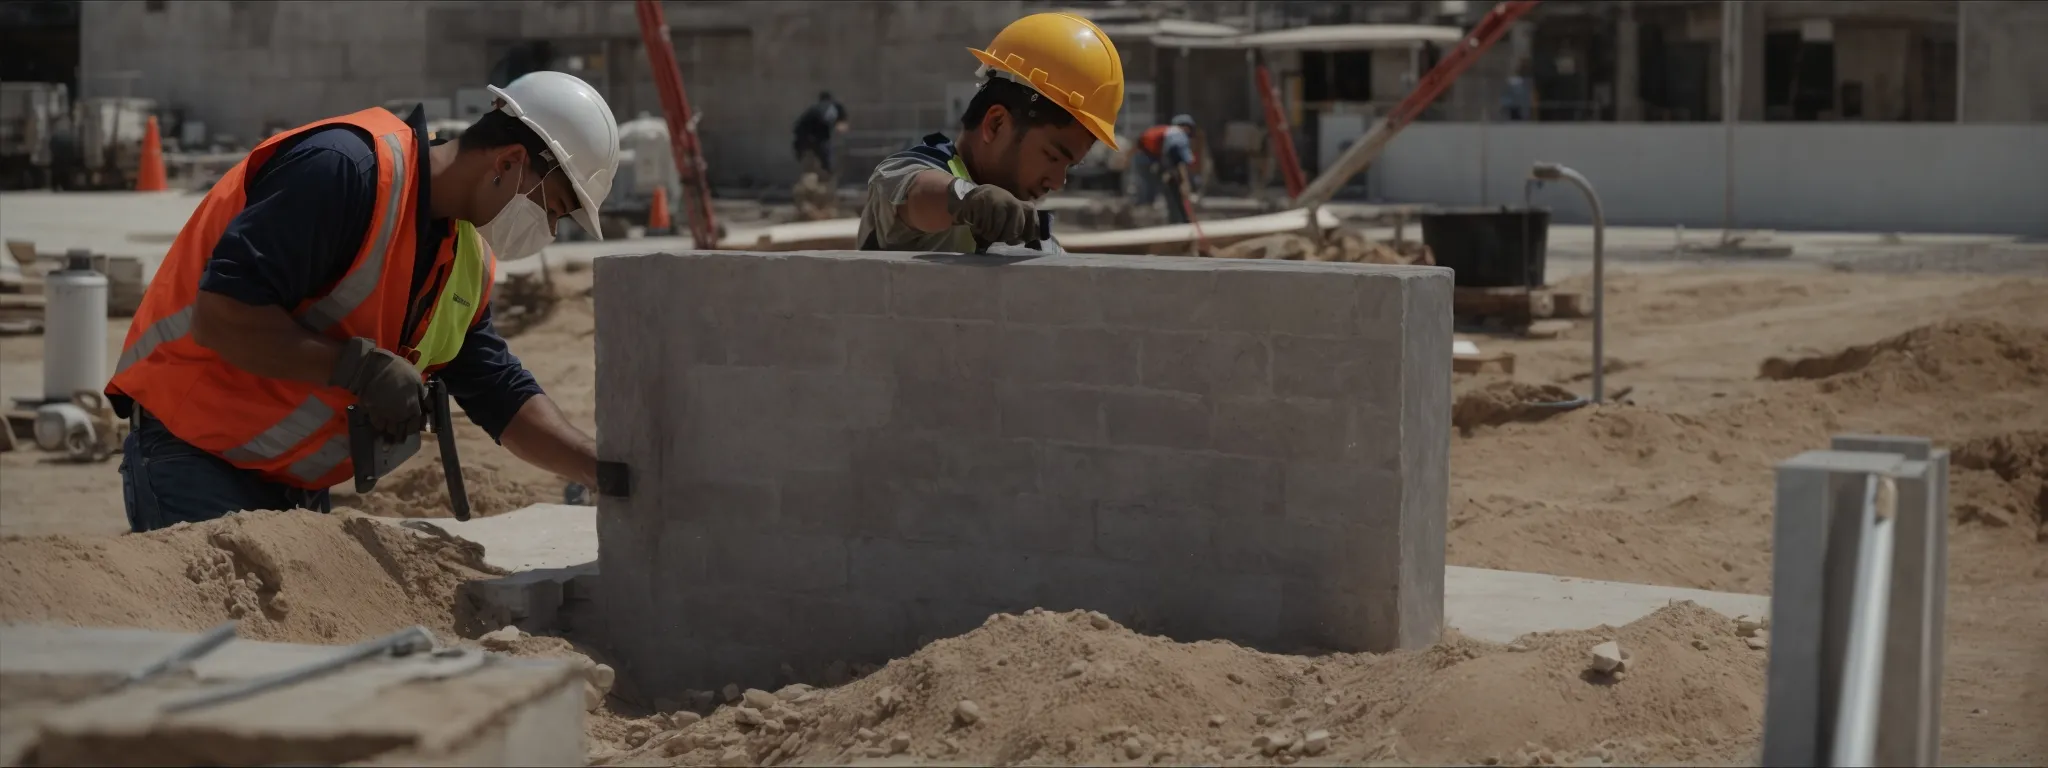 a construction worker carefully setting a cornerstone in place as others work in the background.